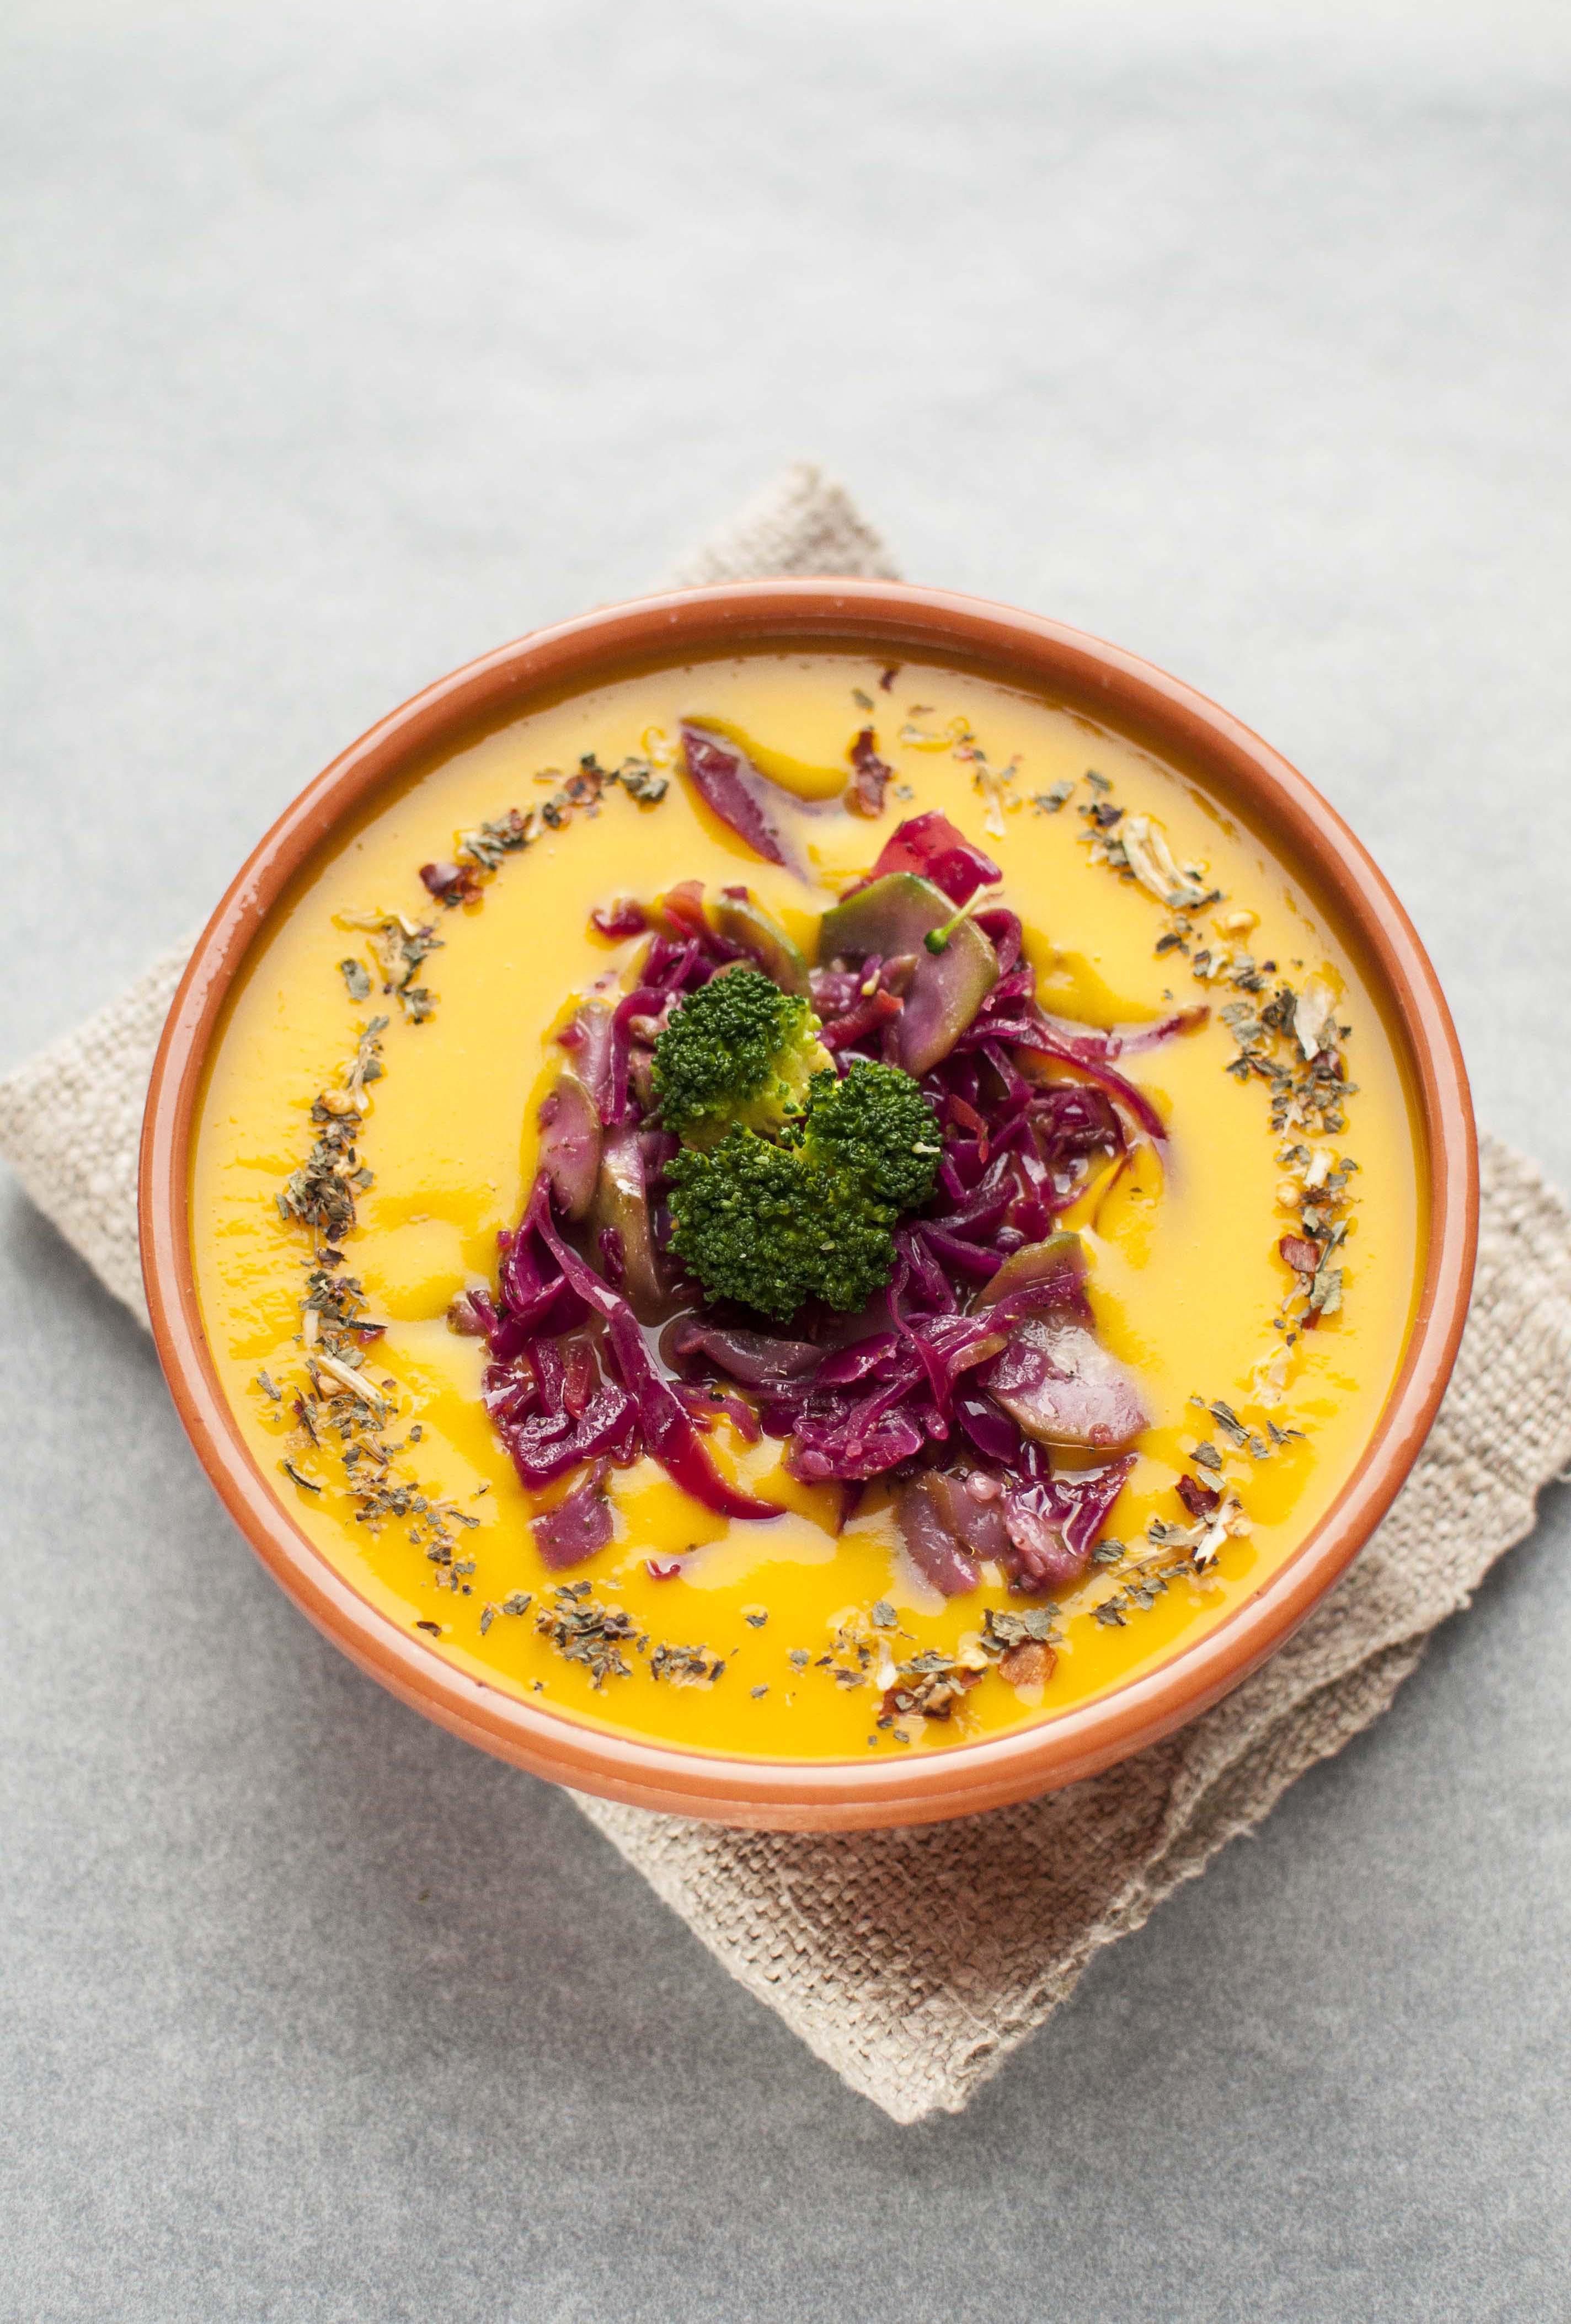 16. Butternut Squash Soup With Fermented Vegetables